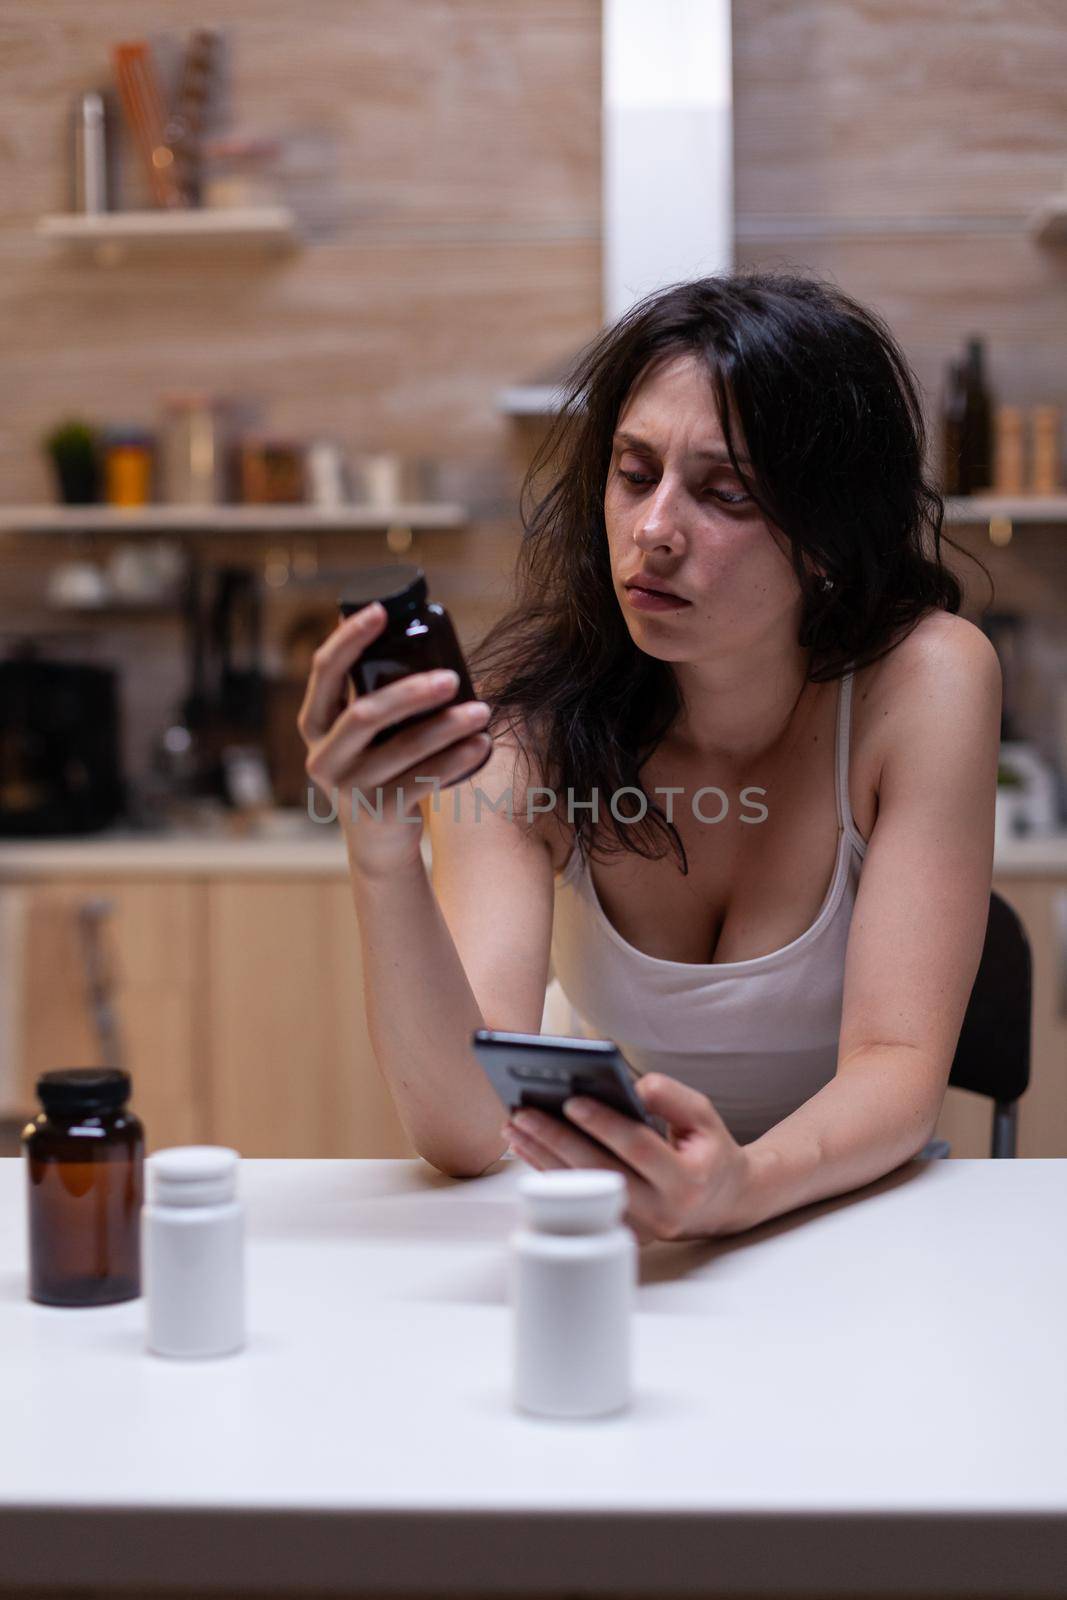 Sick woman with migraine looking at container with medicine and smartphone for prescription. Person with headache holding bottle of drugs, medication, remedy, medicament, treatment